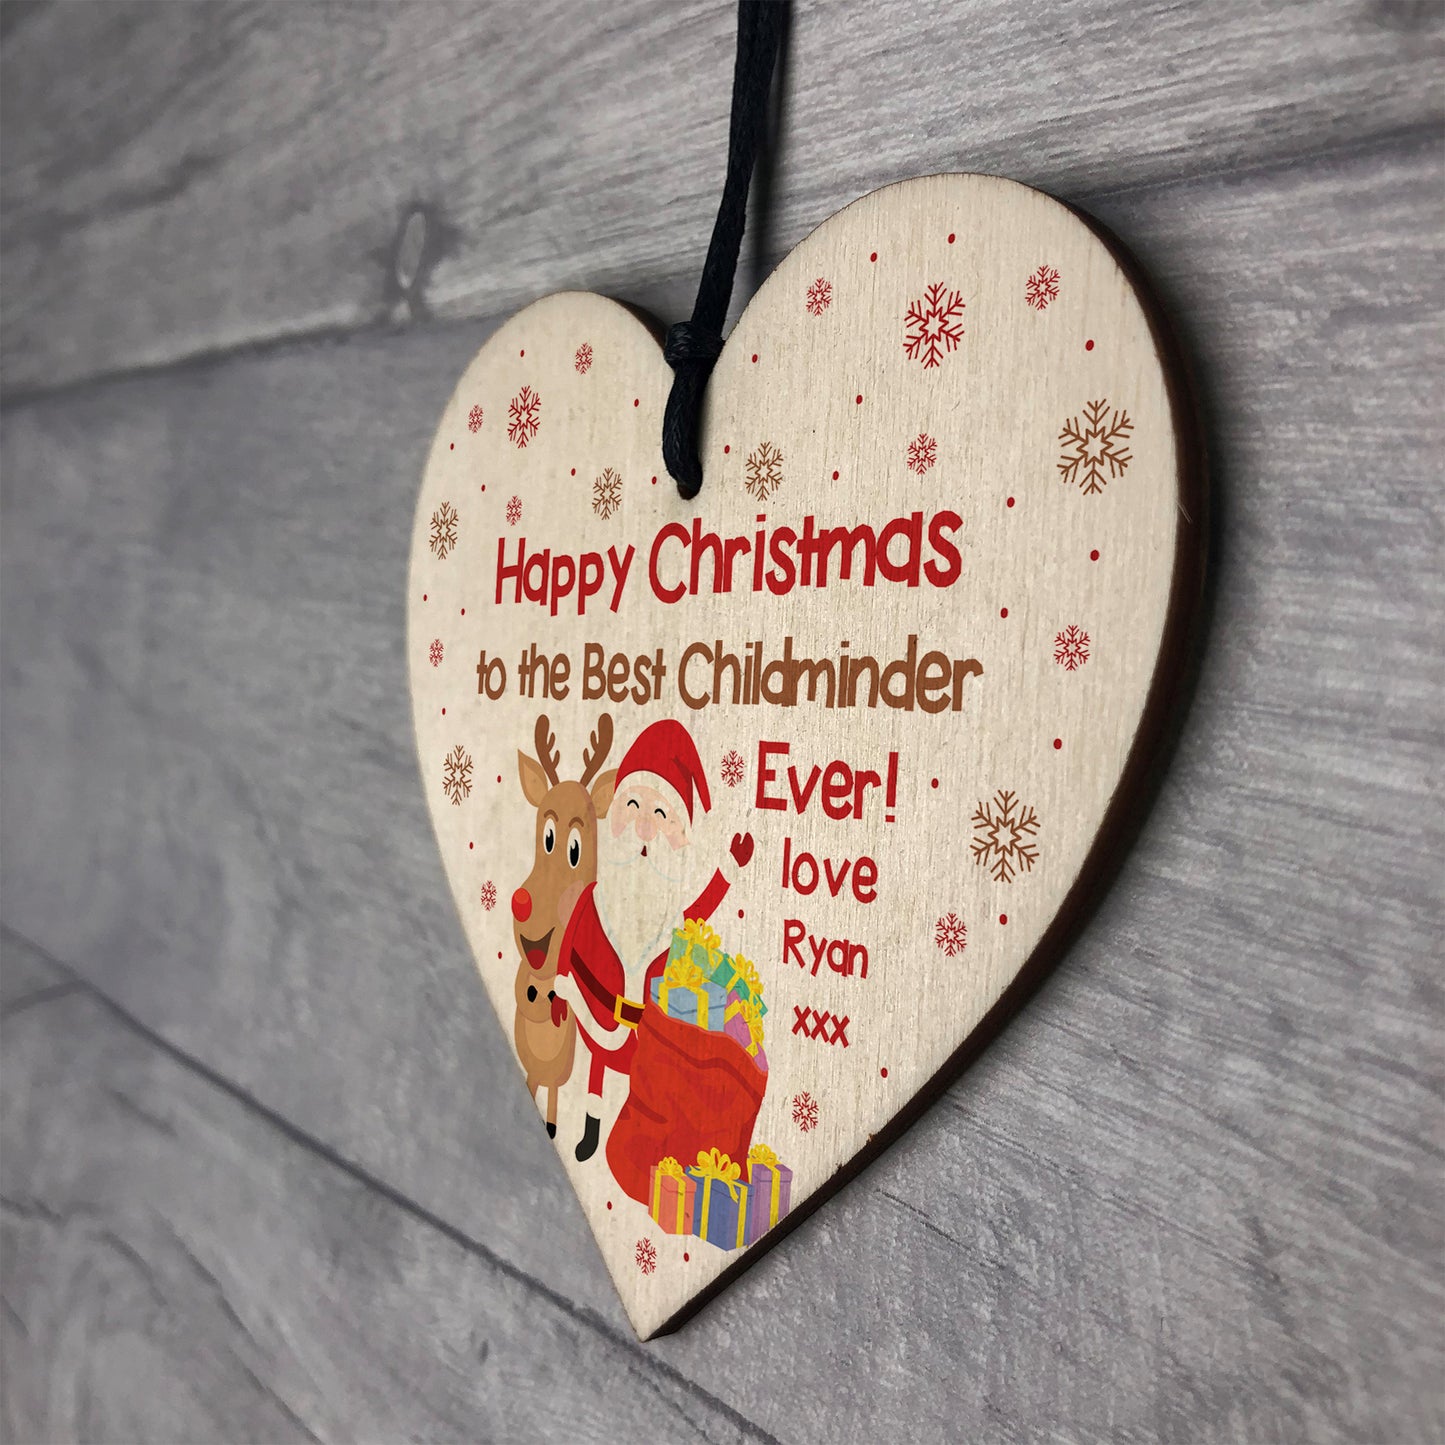 Happy Christmas Gift For Childminder Wood Heart Personalised